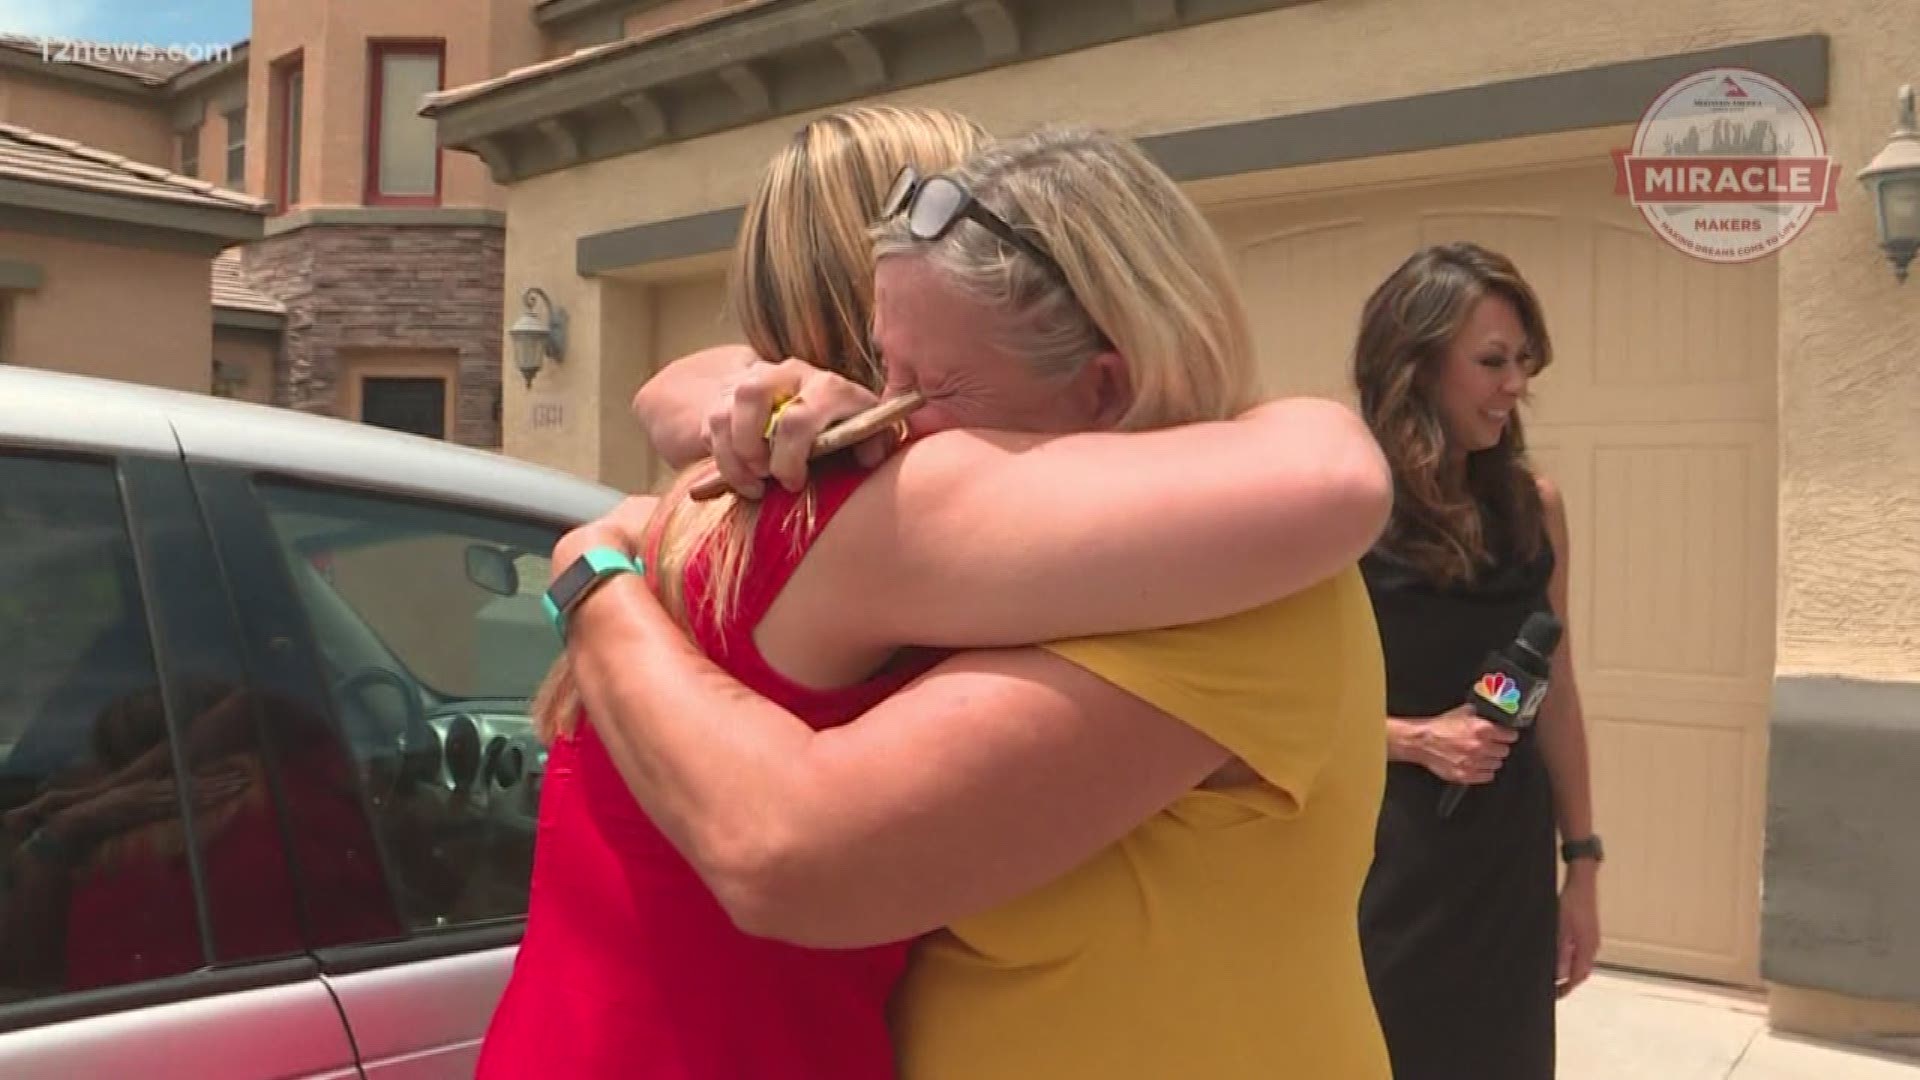 After being nominated by a friend, this Valley grandmother was surprised with a new car thanks to the 12 News Miracle Makers program.